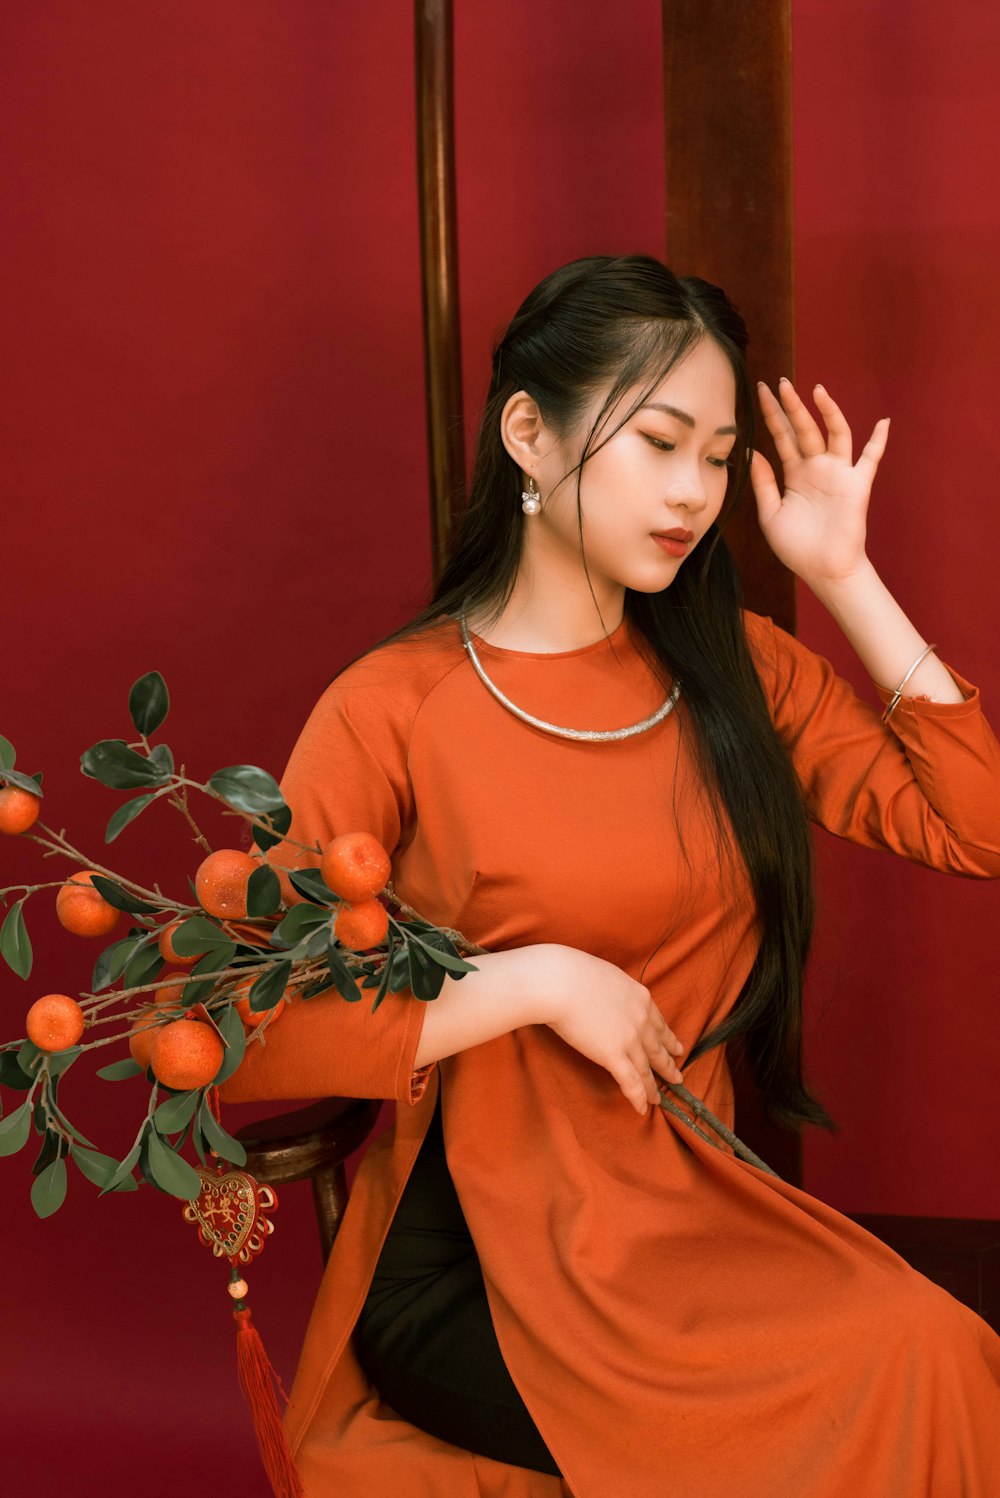 a woman sitting on a chair holding a bouquet of oranges